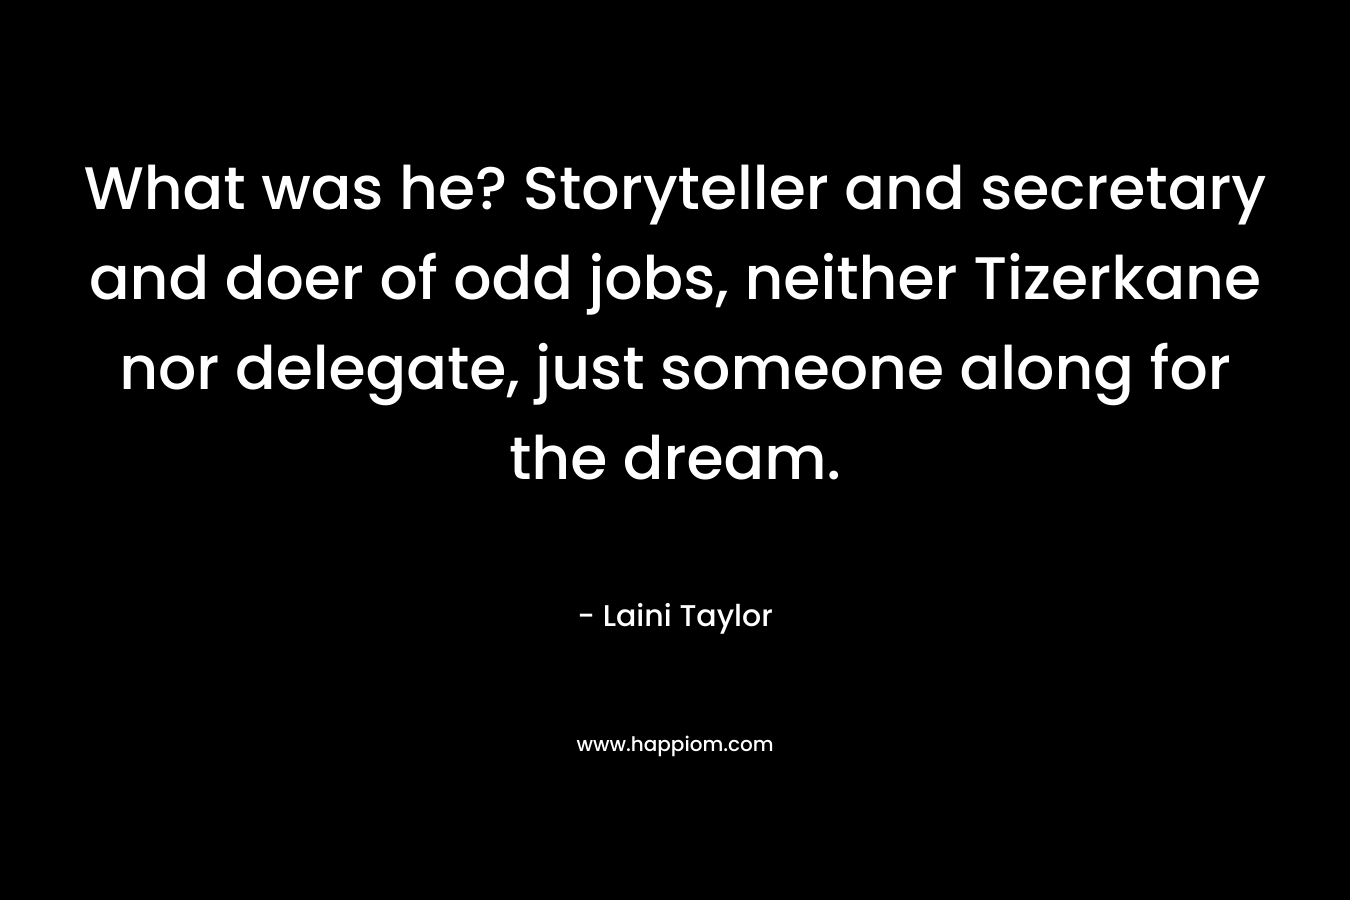 What was he? Storyteller and secretary and doer of odd jobs, neither Tizerkane nor delegate, just someone along for the dream.